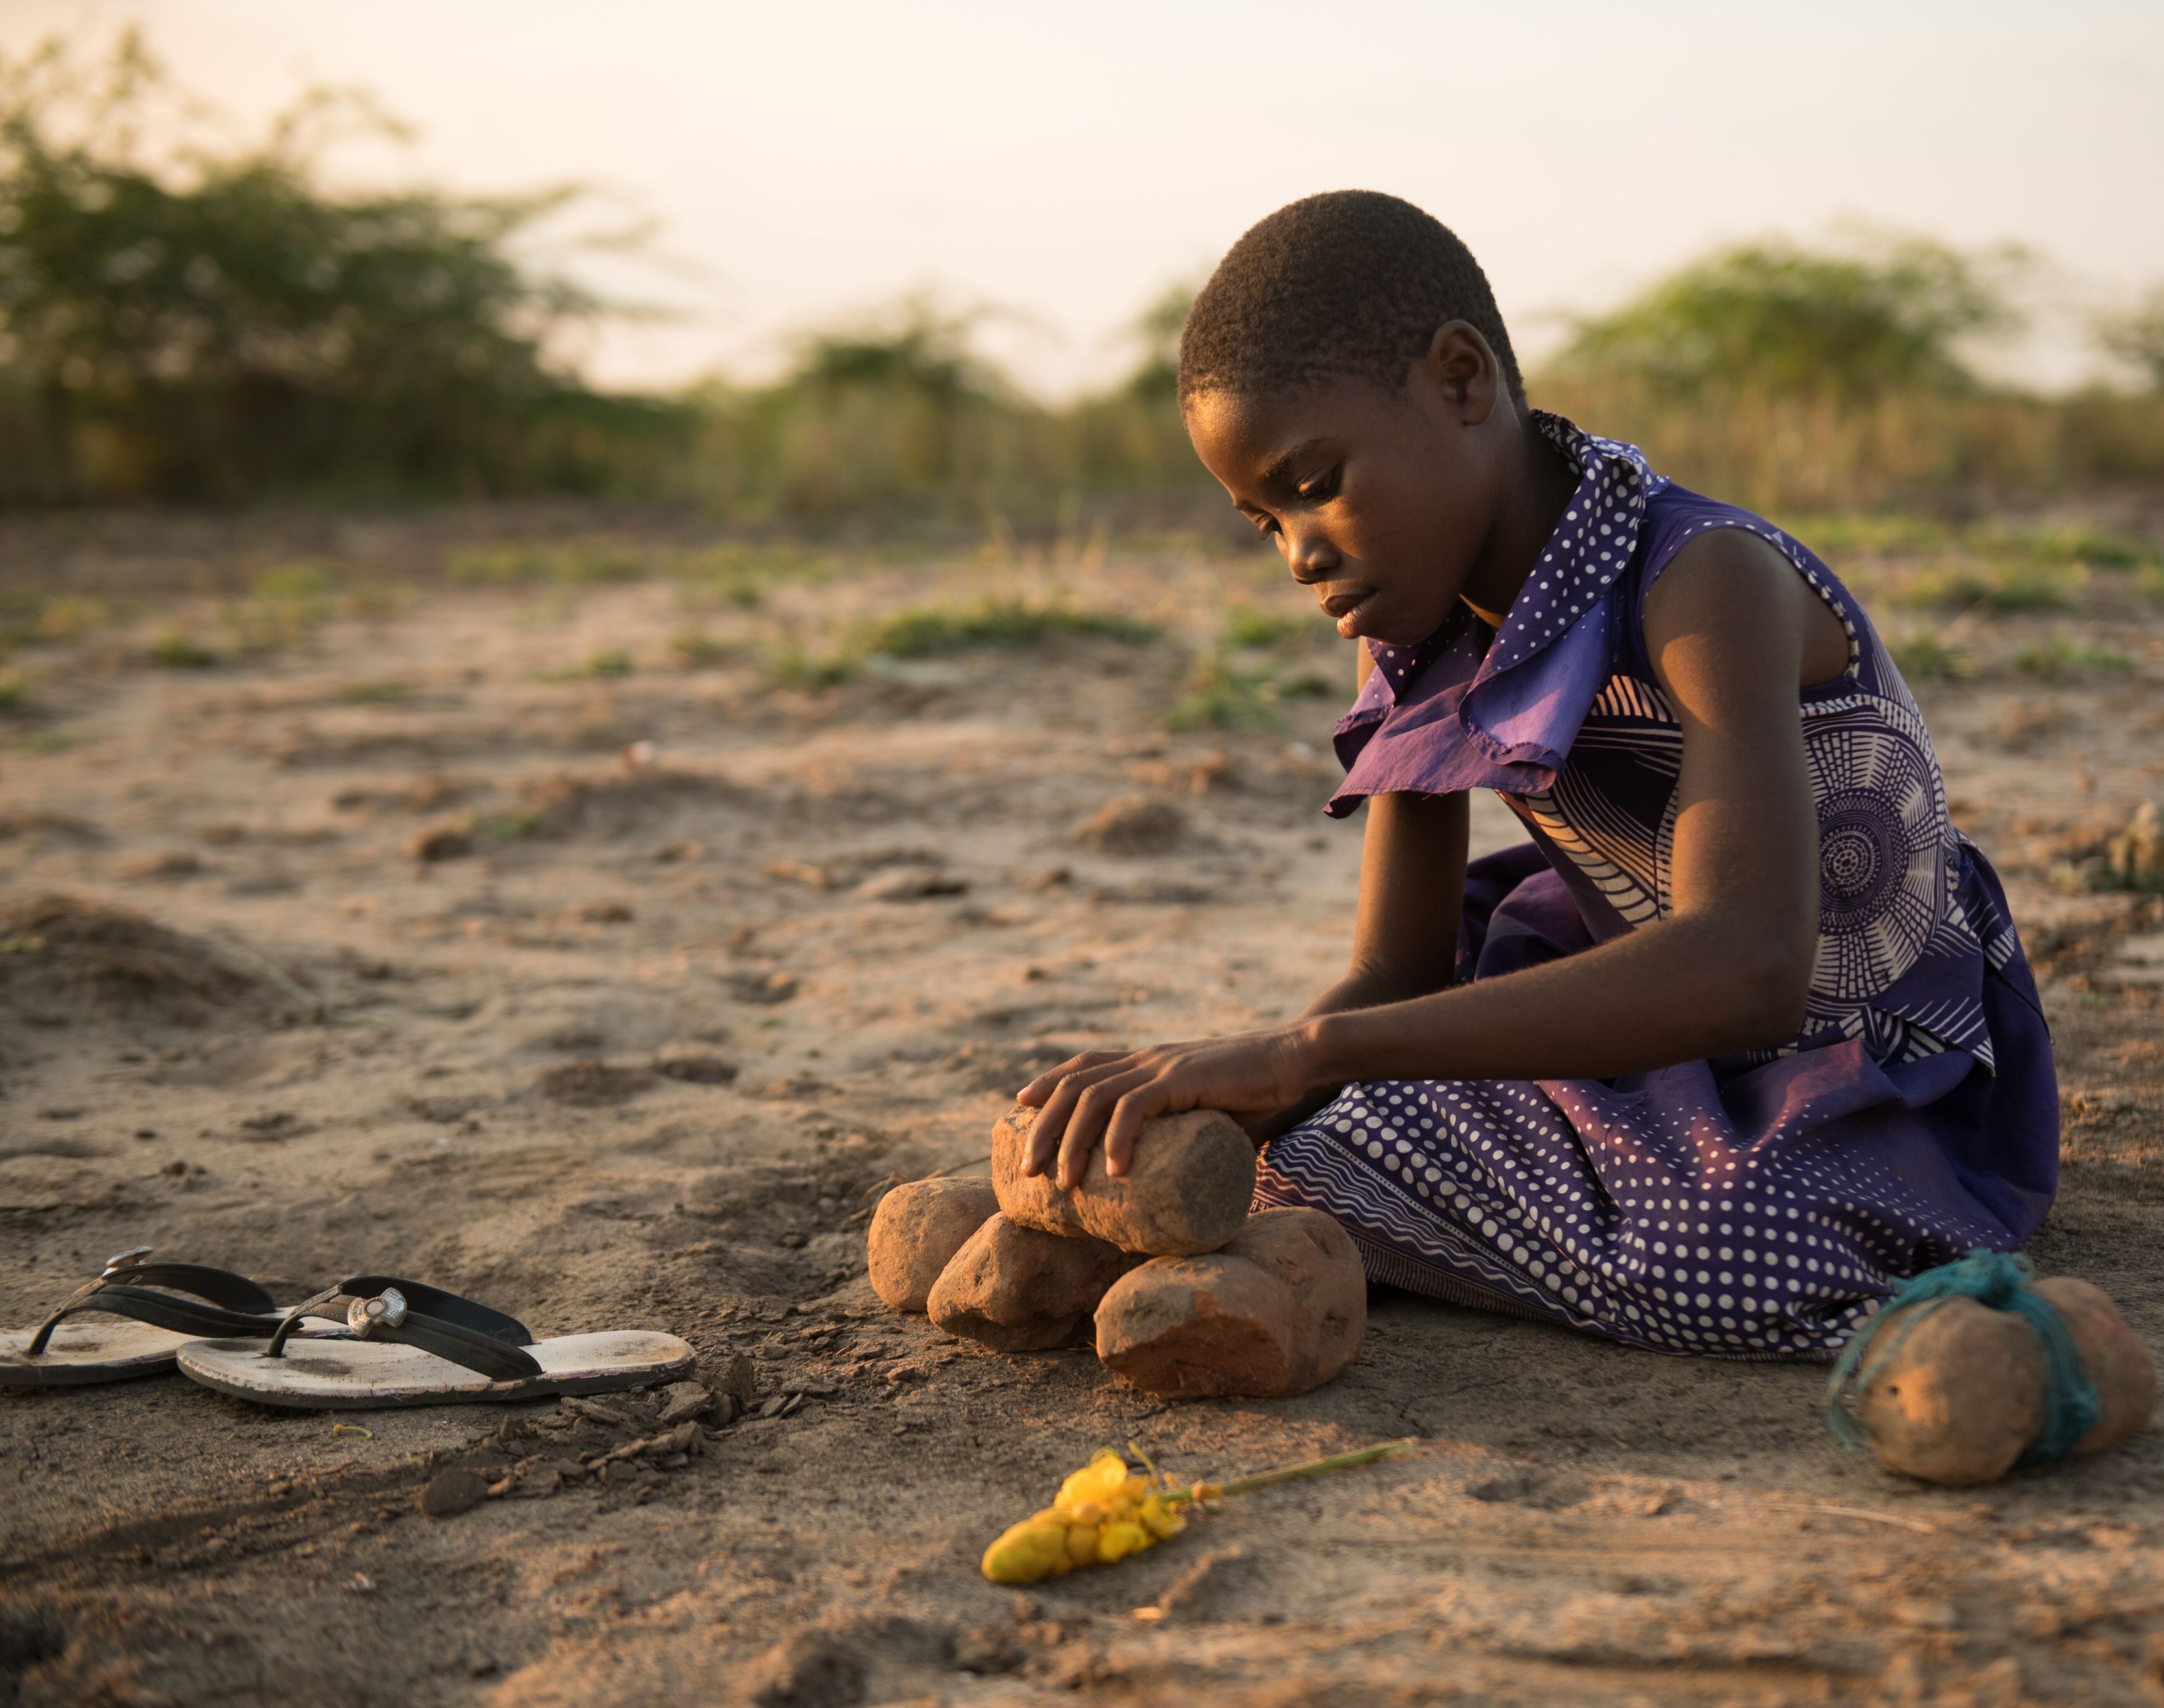 Sarah, 11, using bricks to represent her house that was destroyed during the flood, Malawi.